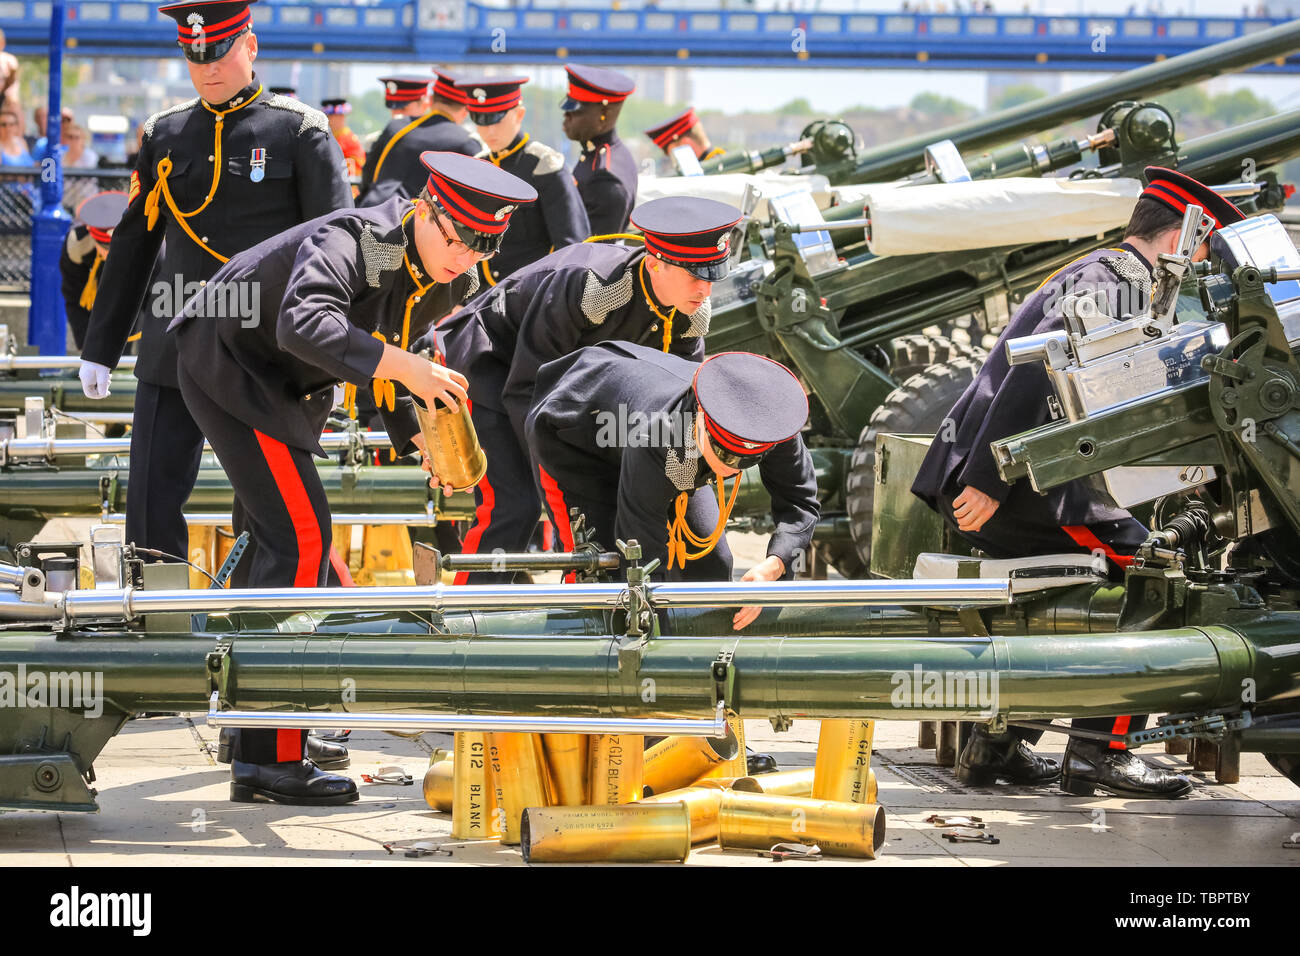 London, UK, 03rd June 2019. The cartridges are collected. A 103 round gun salute by the Honourable Artillery Company at HM Tower of London is fired at midday. The 103 rounds are:  41 to mark 66 years since HM The Queen’s coronation, 41 to mark the state visit of the President of the United States, and 21 for the City of London. Credit: Imageplotter/Alamy Live News Stock Photo